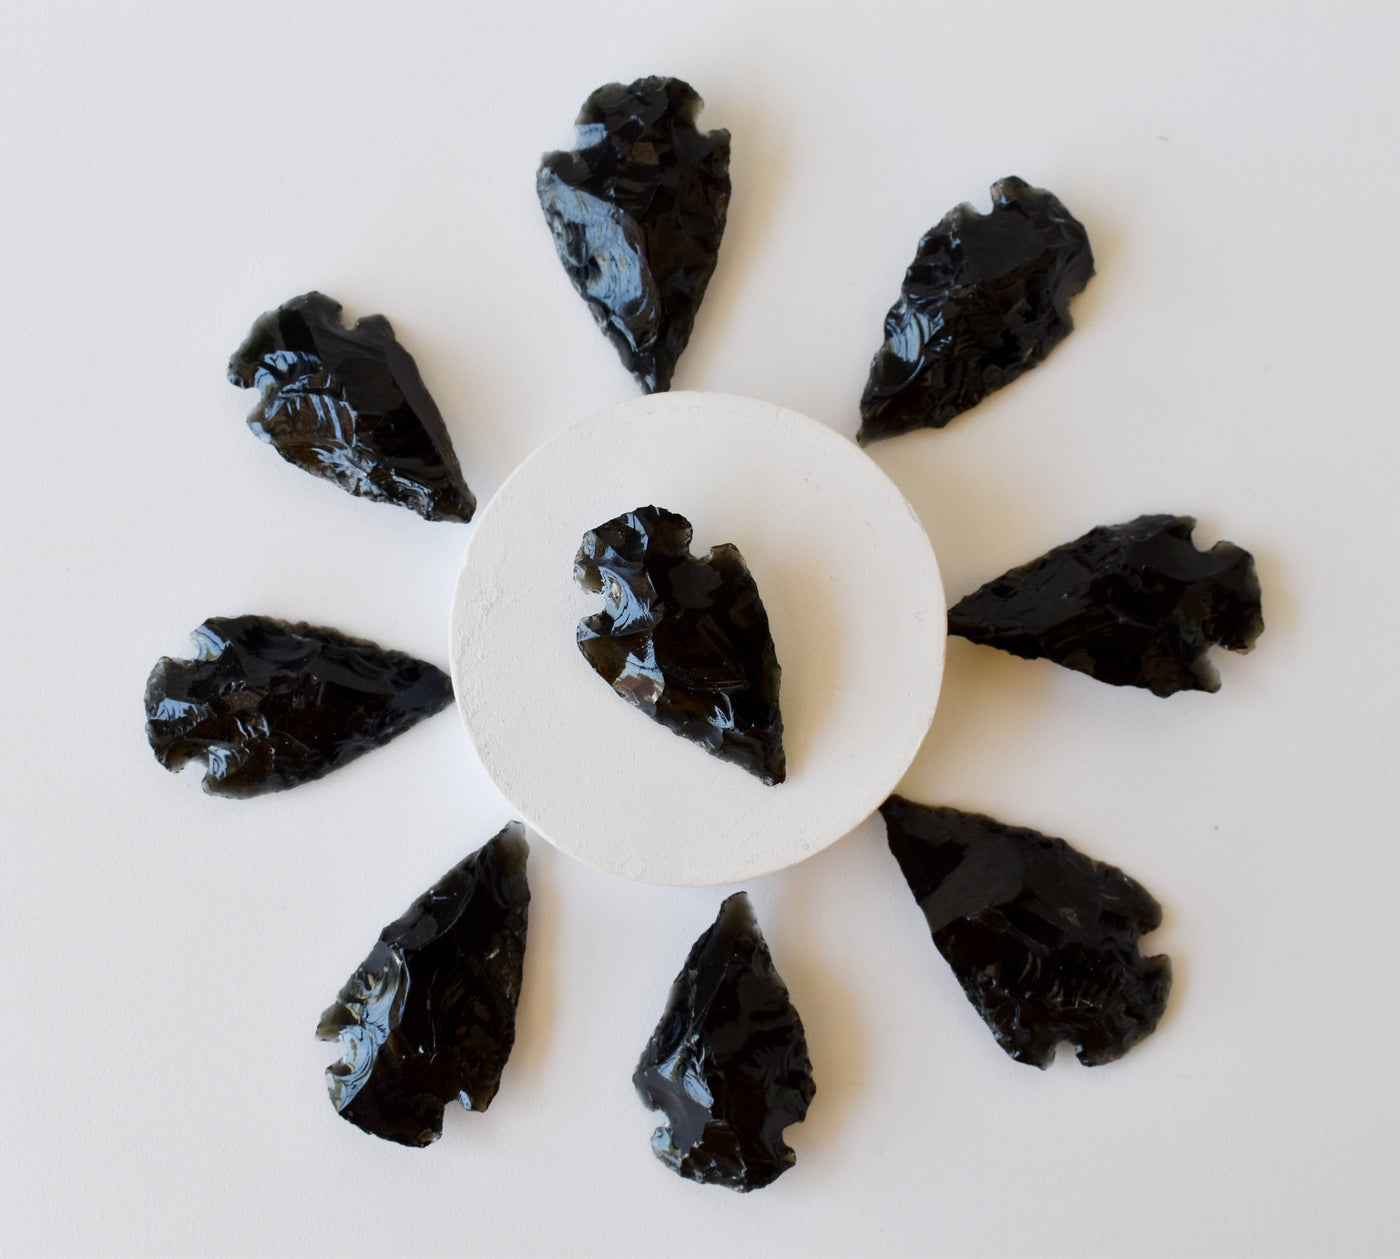 Gemstone Arrowheads for DIY Project Craft Point Jewelry Making